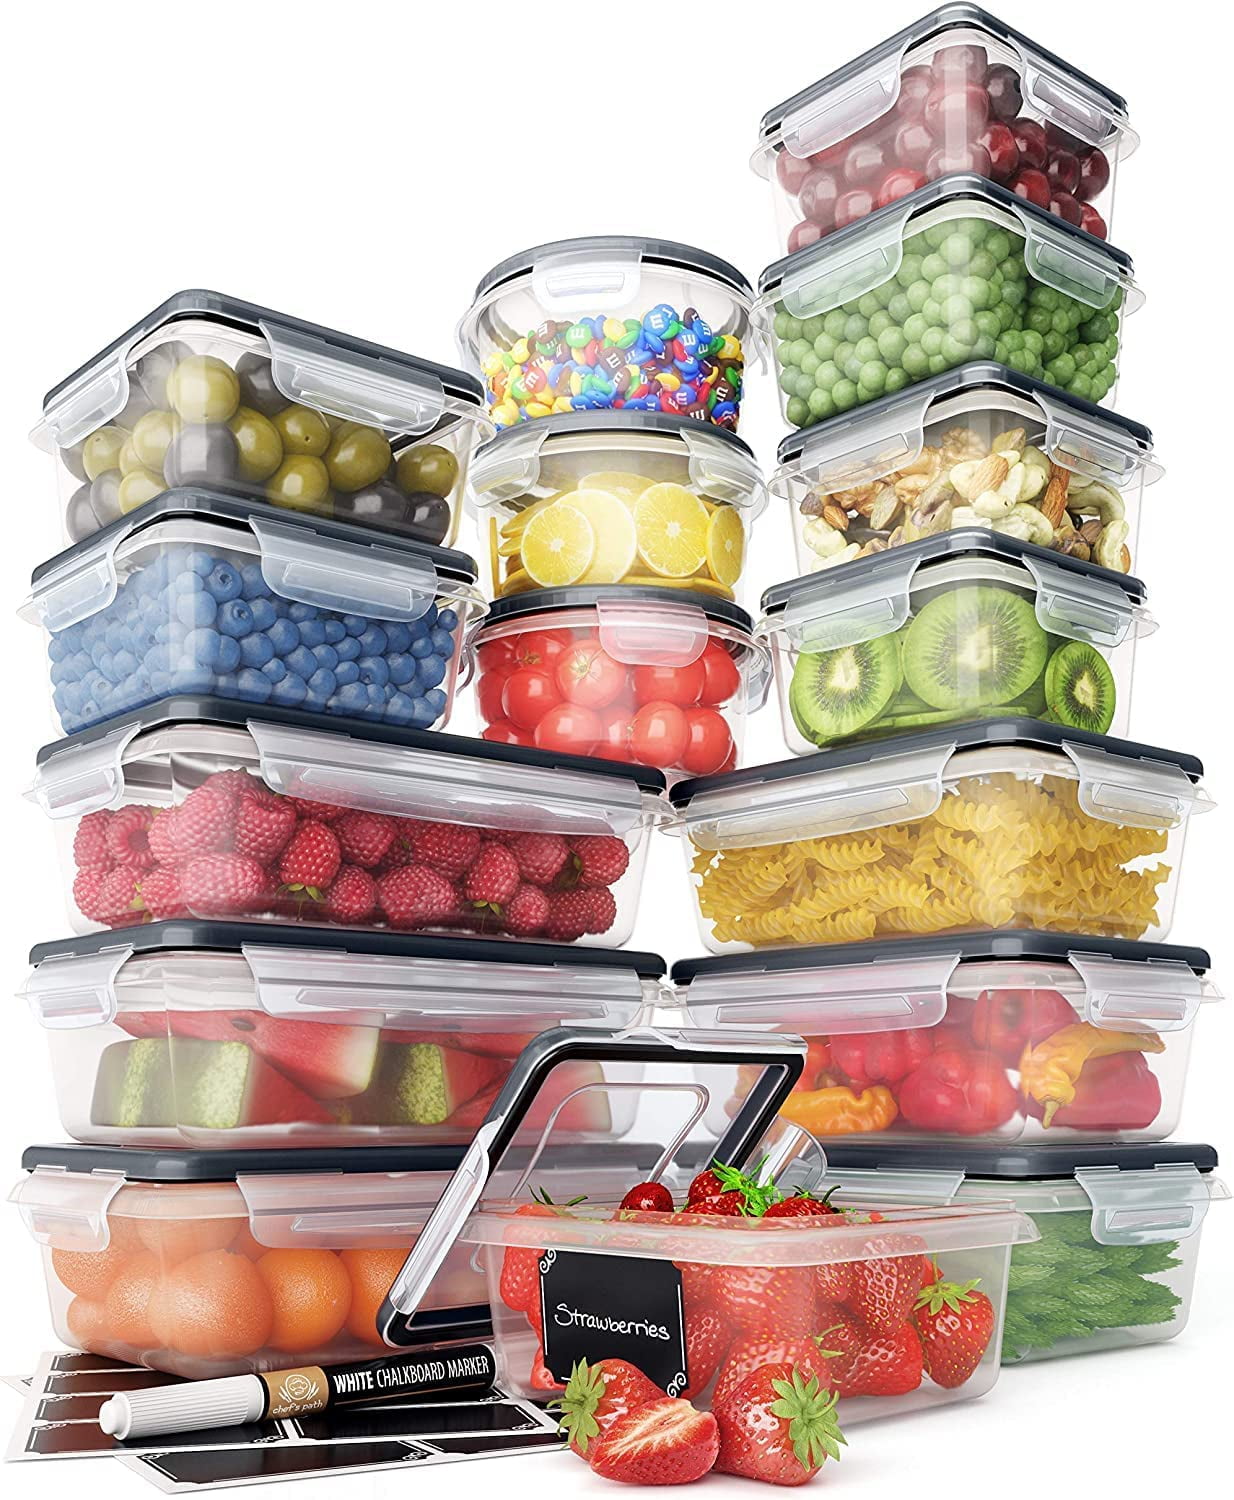 fullstar 50-piece Food storage Containers Set with Lids, Plastic Leak-Proof  BPA-Free Containers for Kitchen Organization, Meal Prep, Lunch Containers